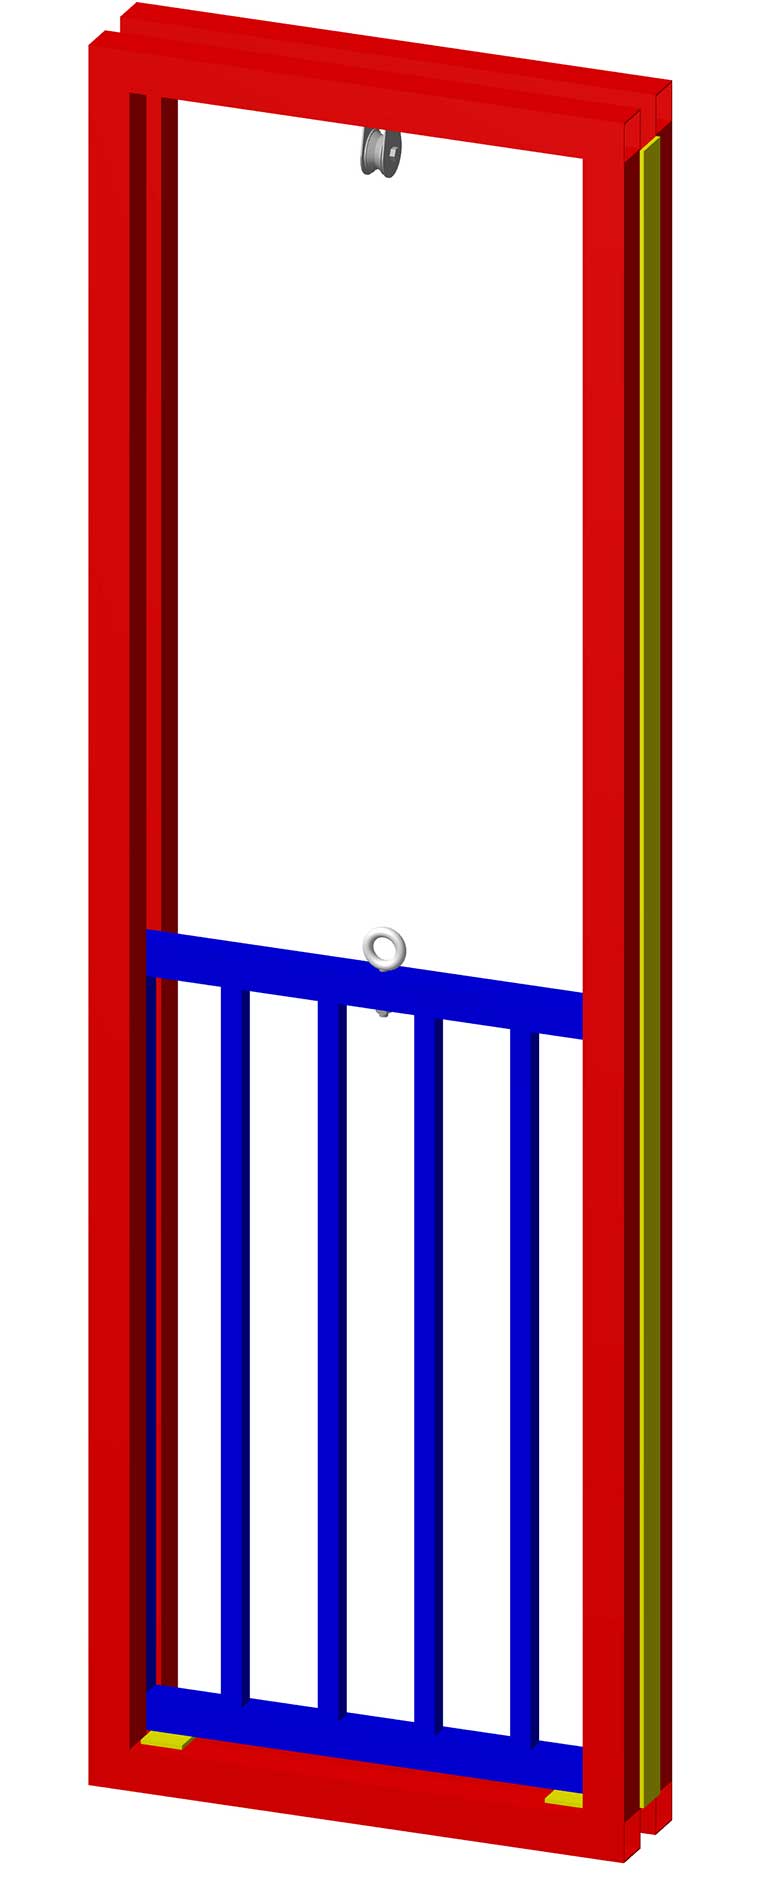 goat and sheep guillotine race gate plans